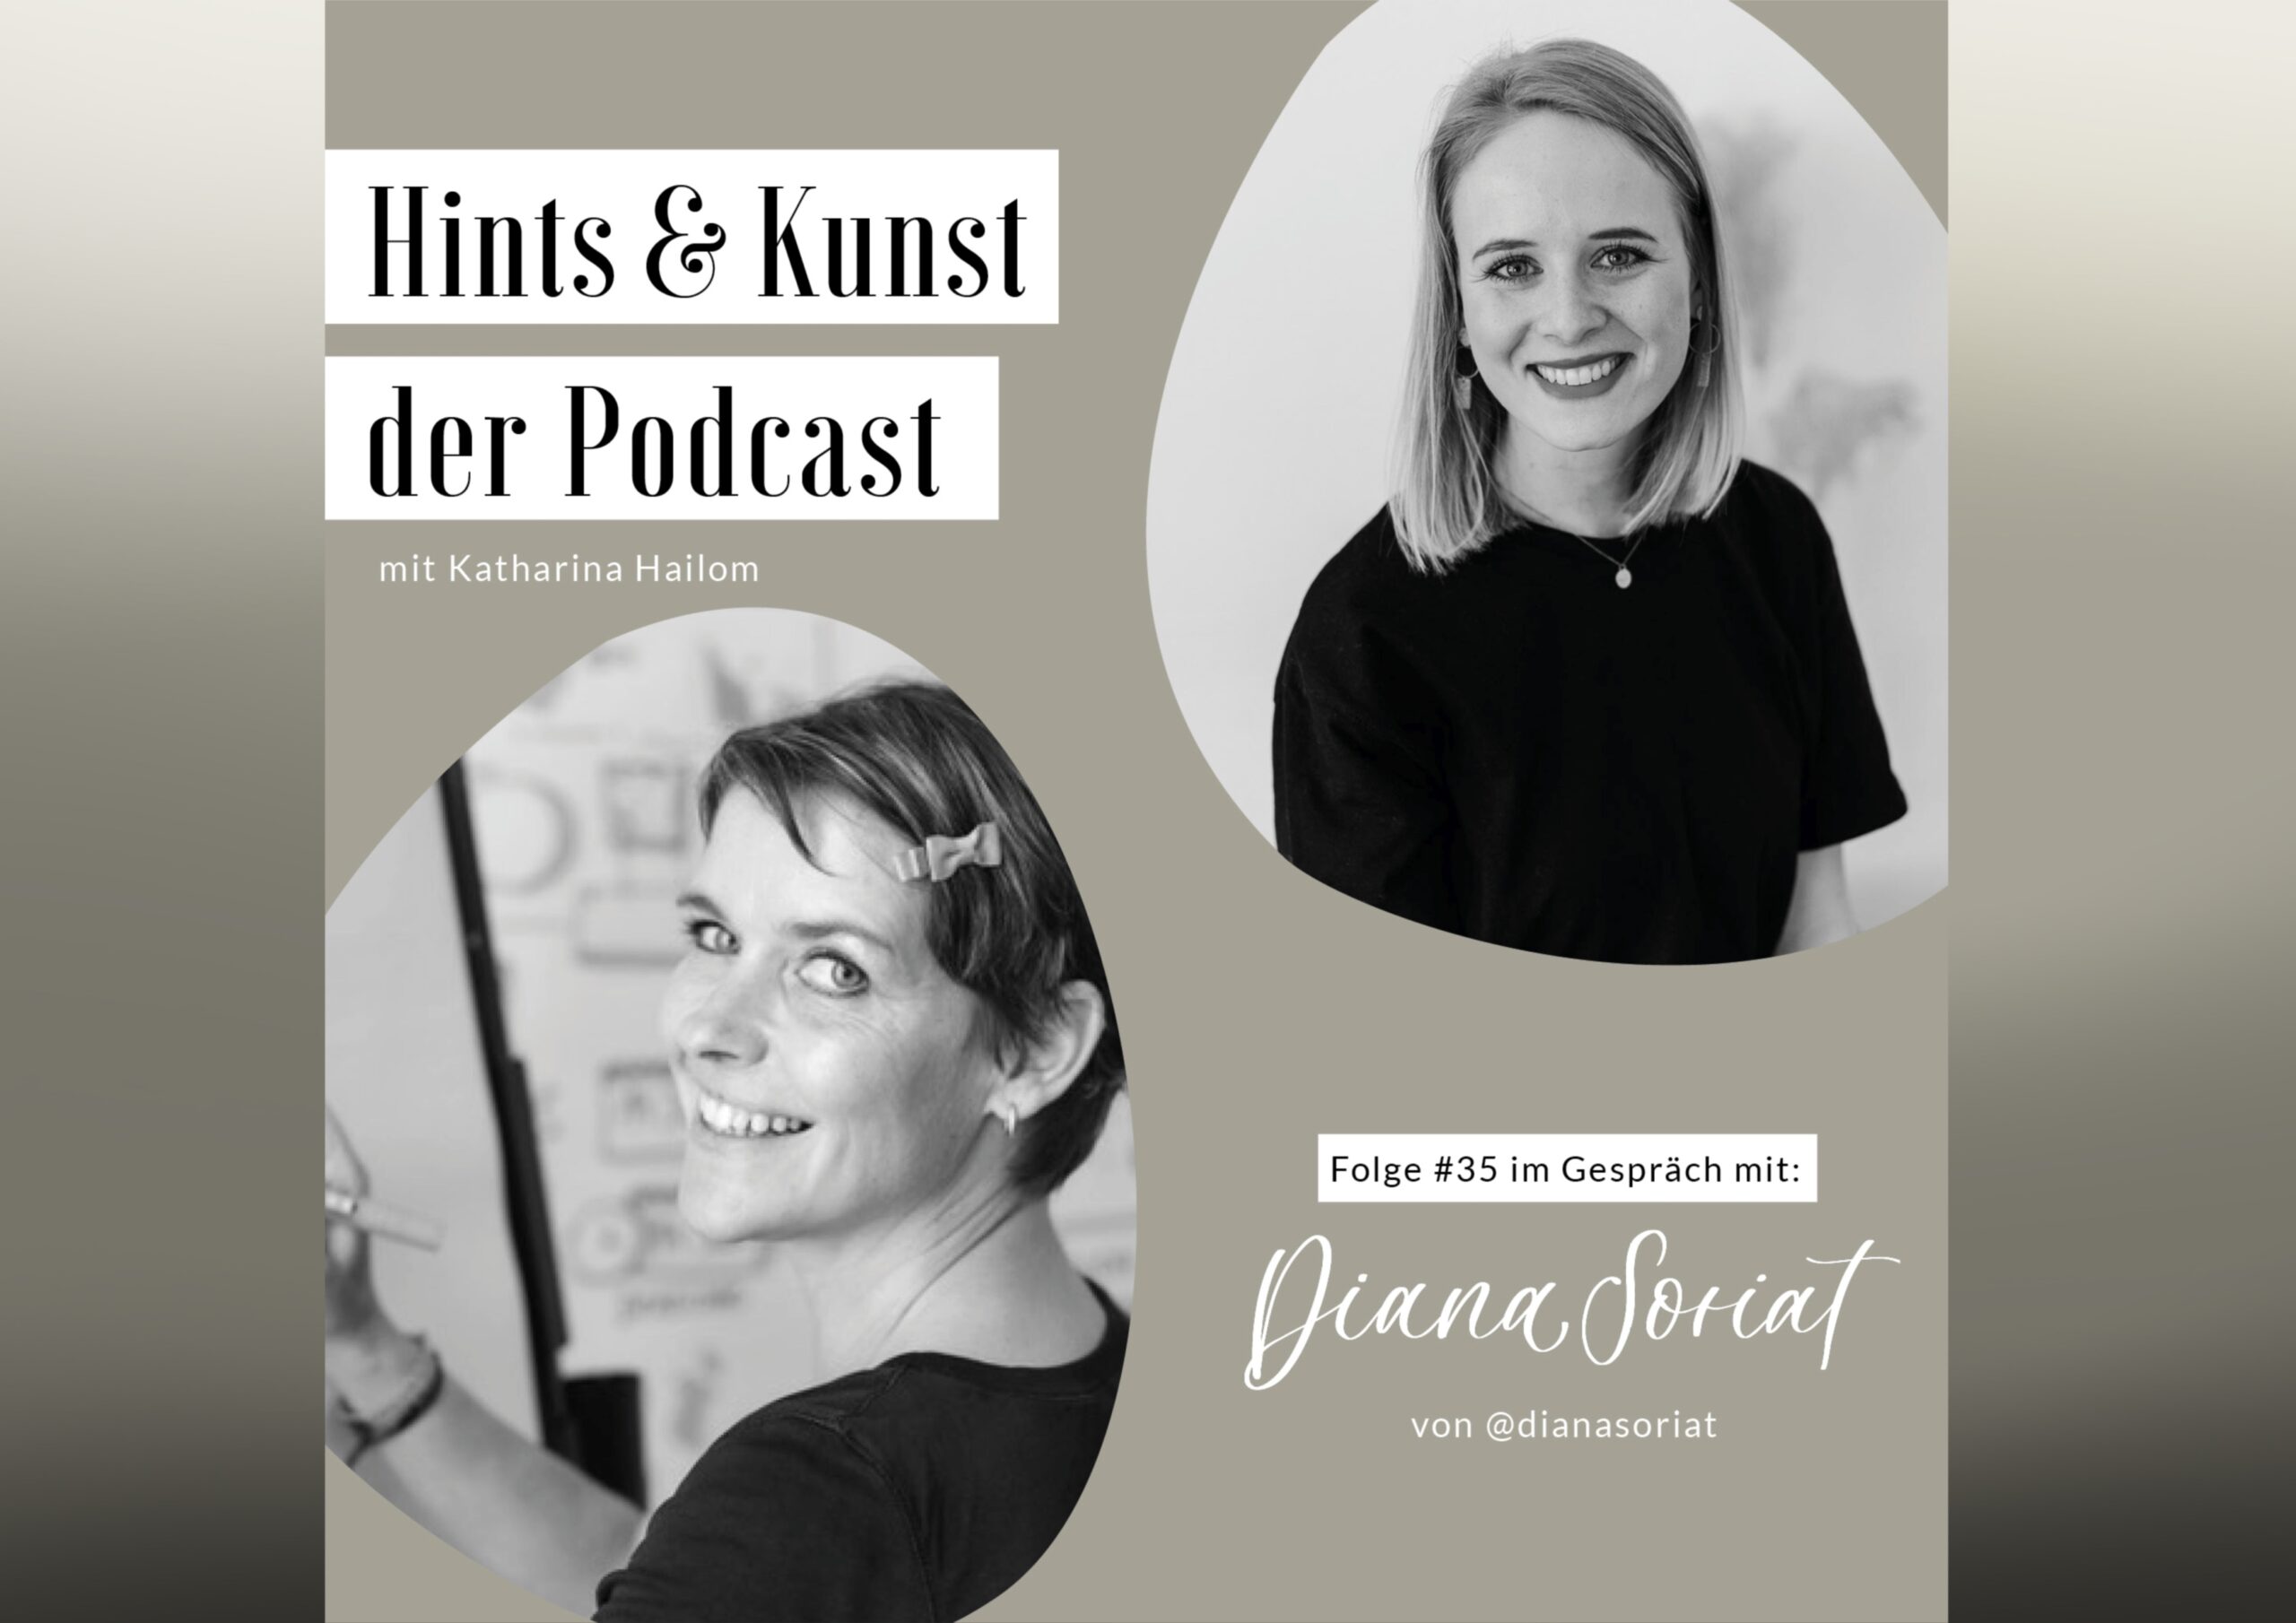 Sketchnotes by Diana meets Hints&Kunst